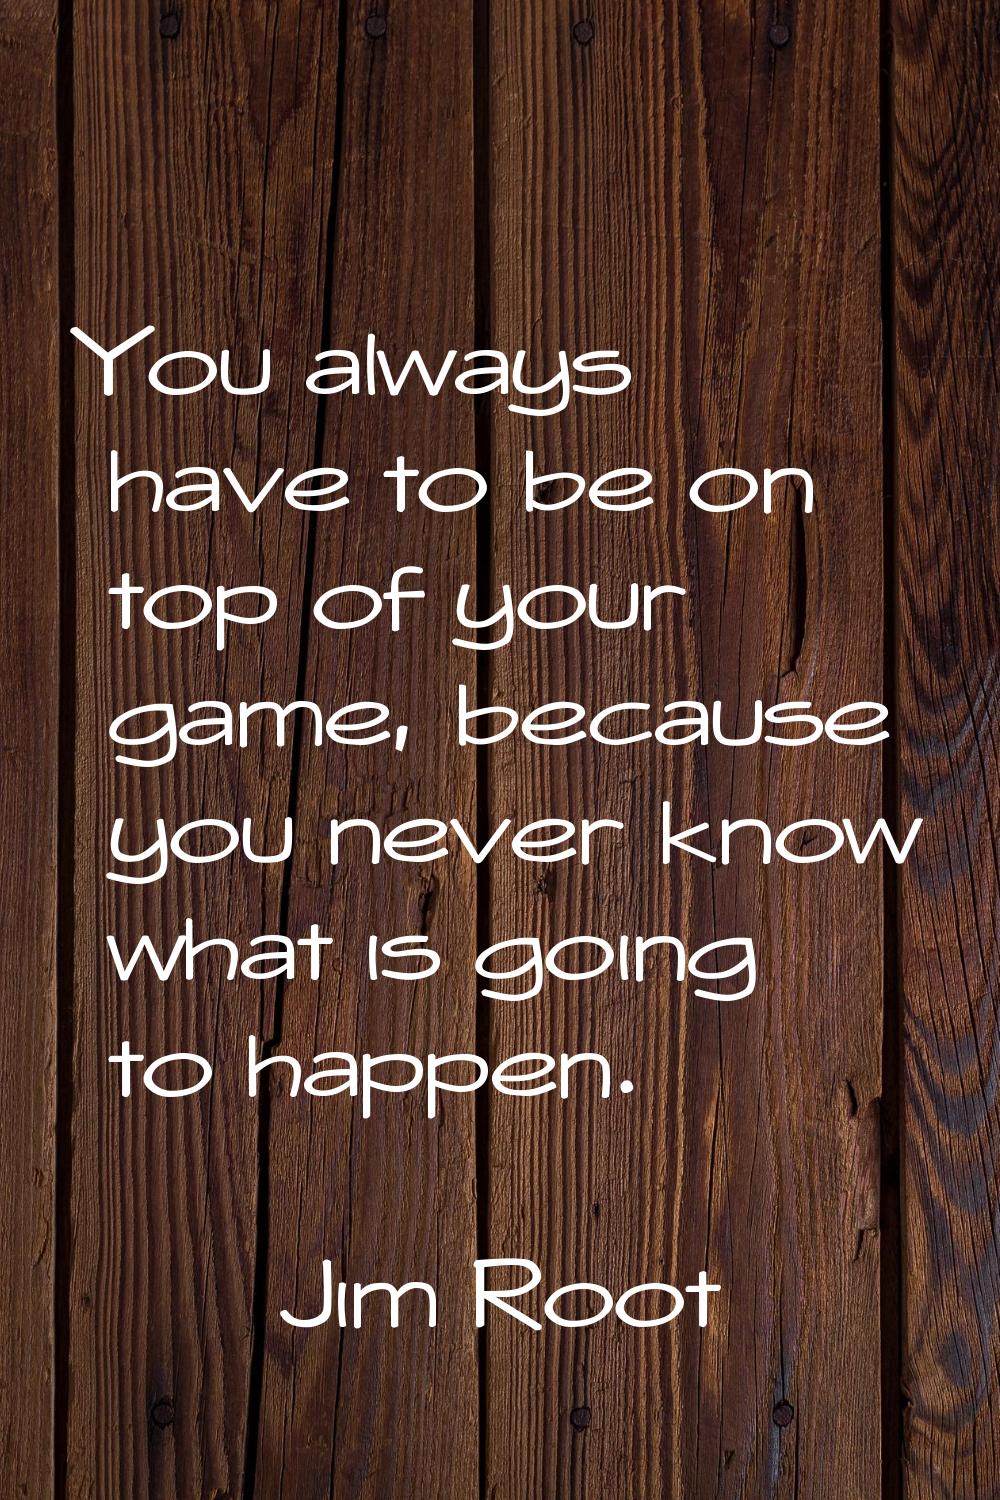 You always have to be on top of your game, because you never know what is going to happen.